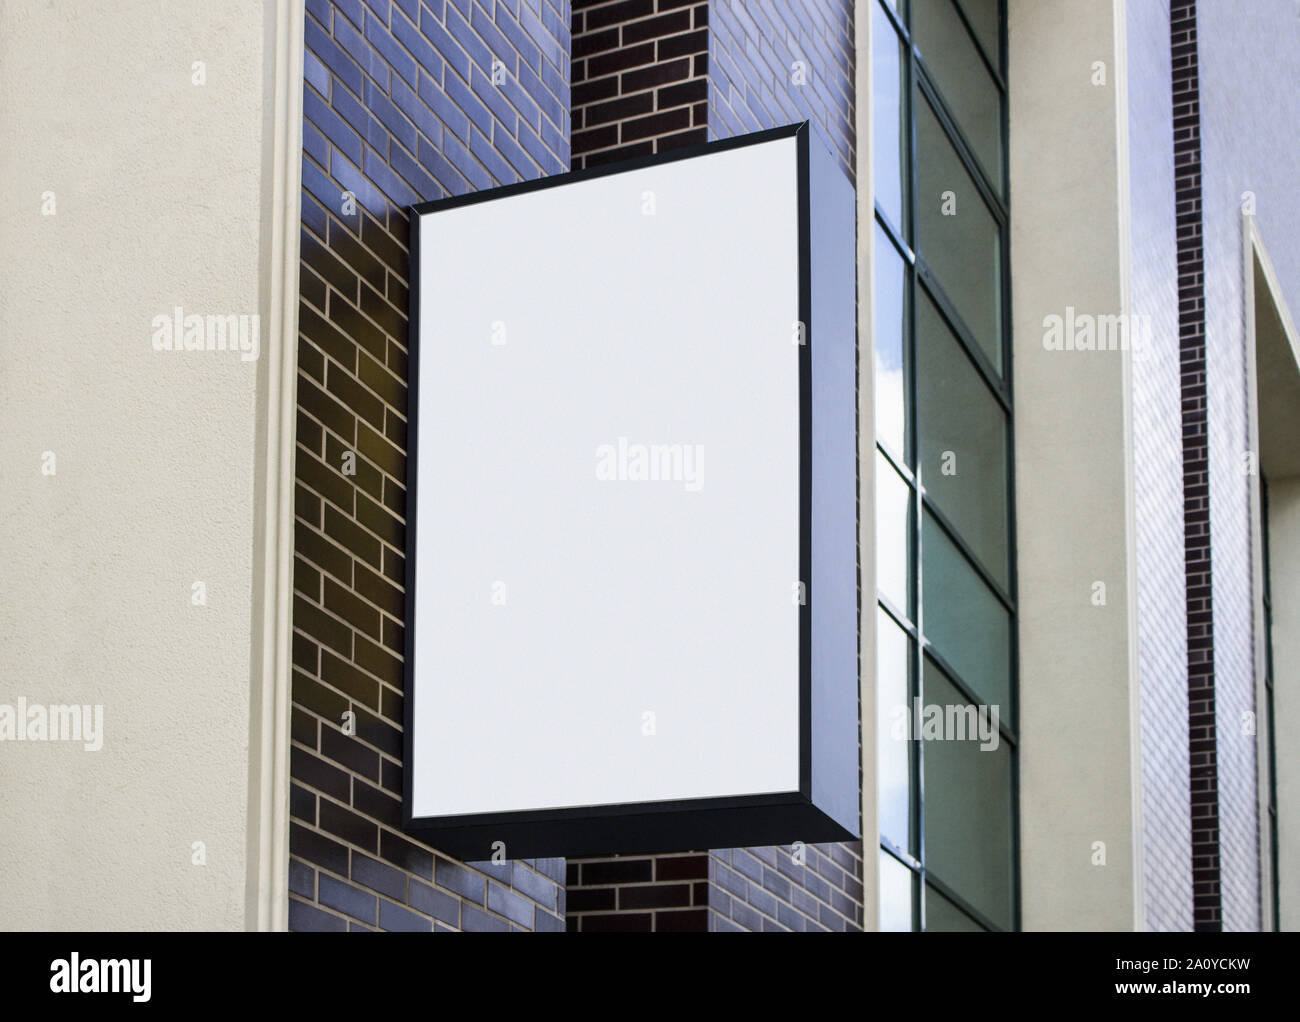 Blank white outdoor box with black frame mockup wall mounted Stock Photo